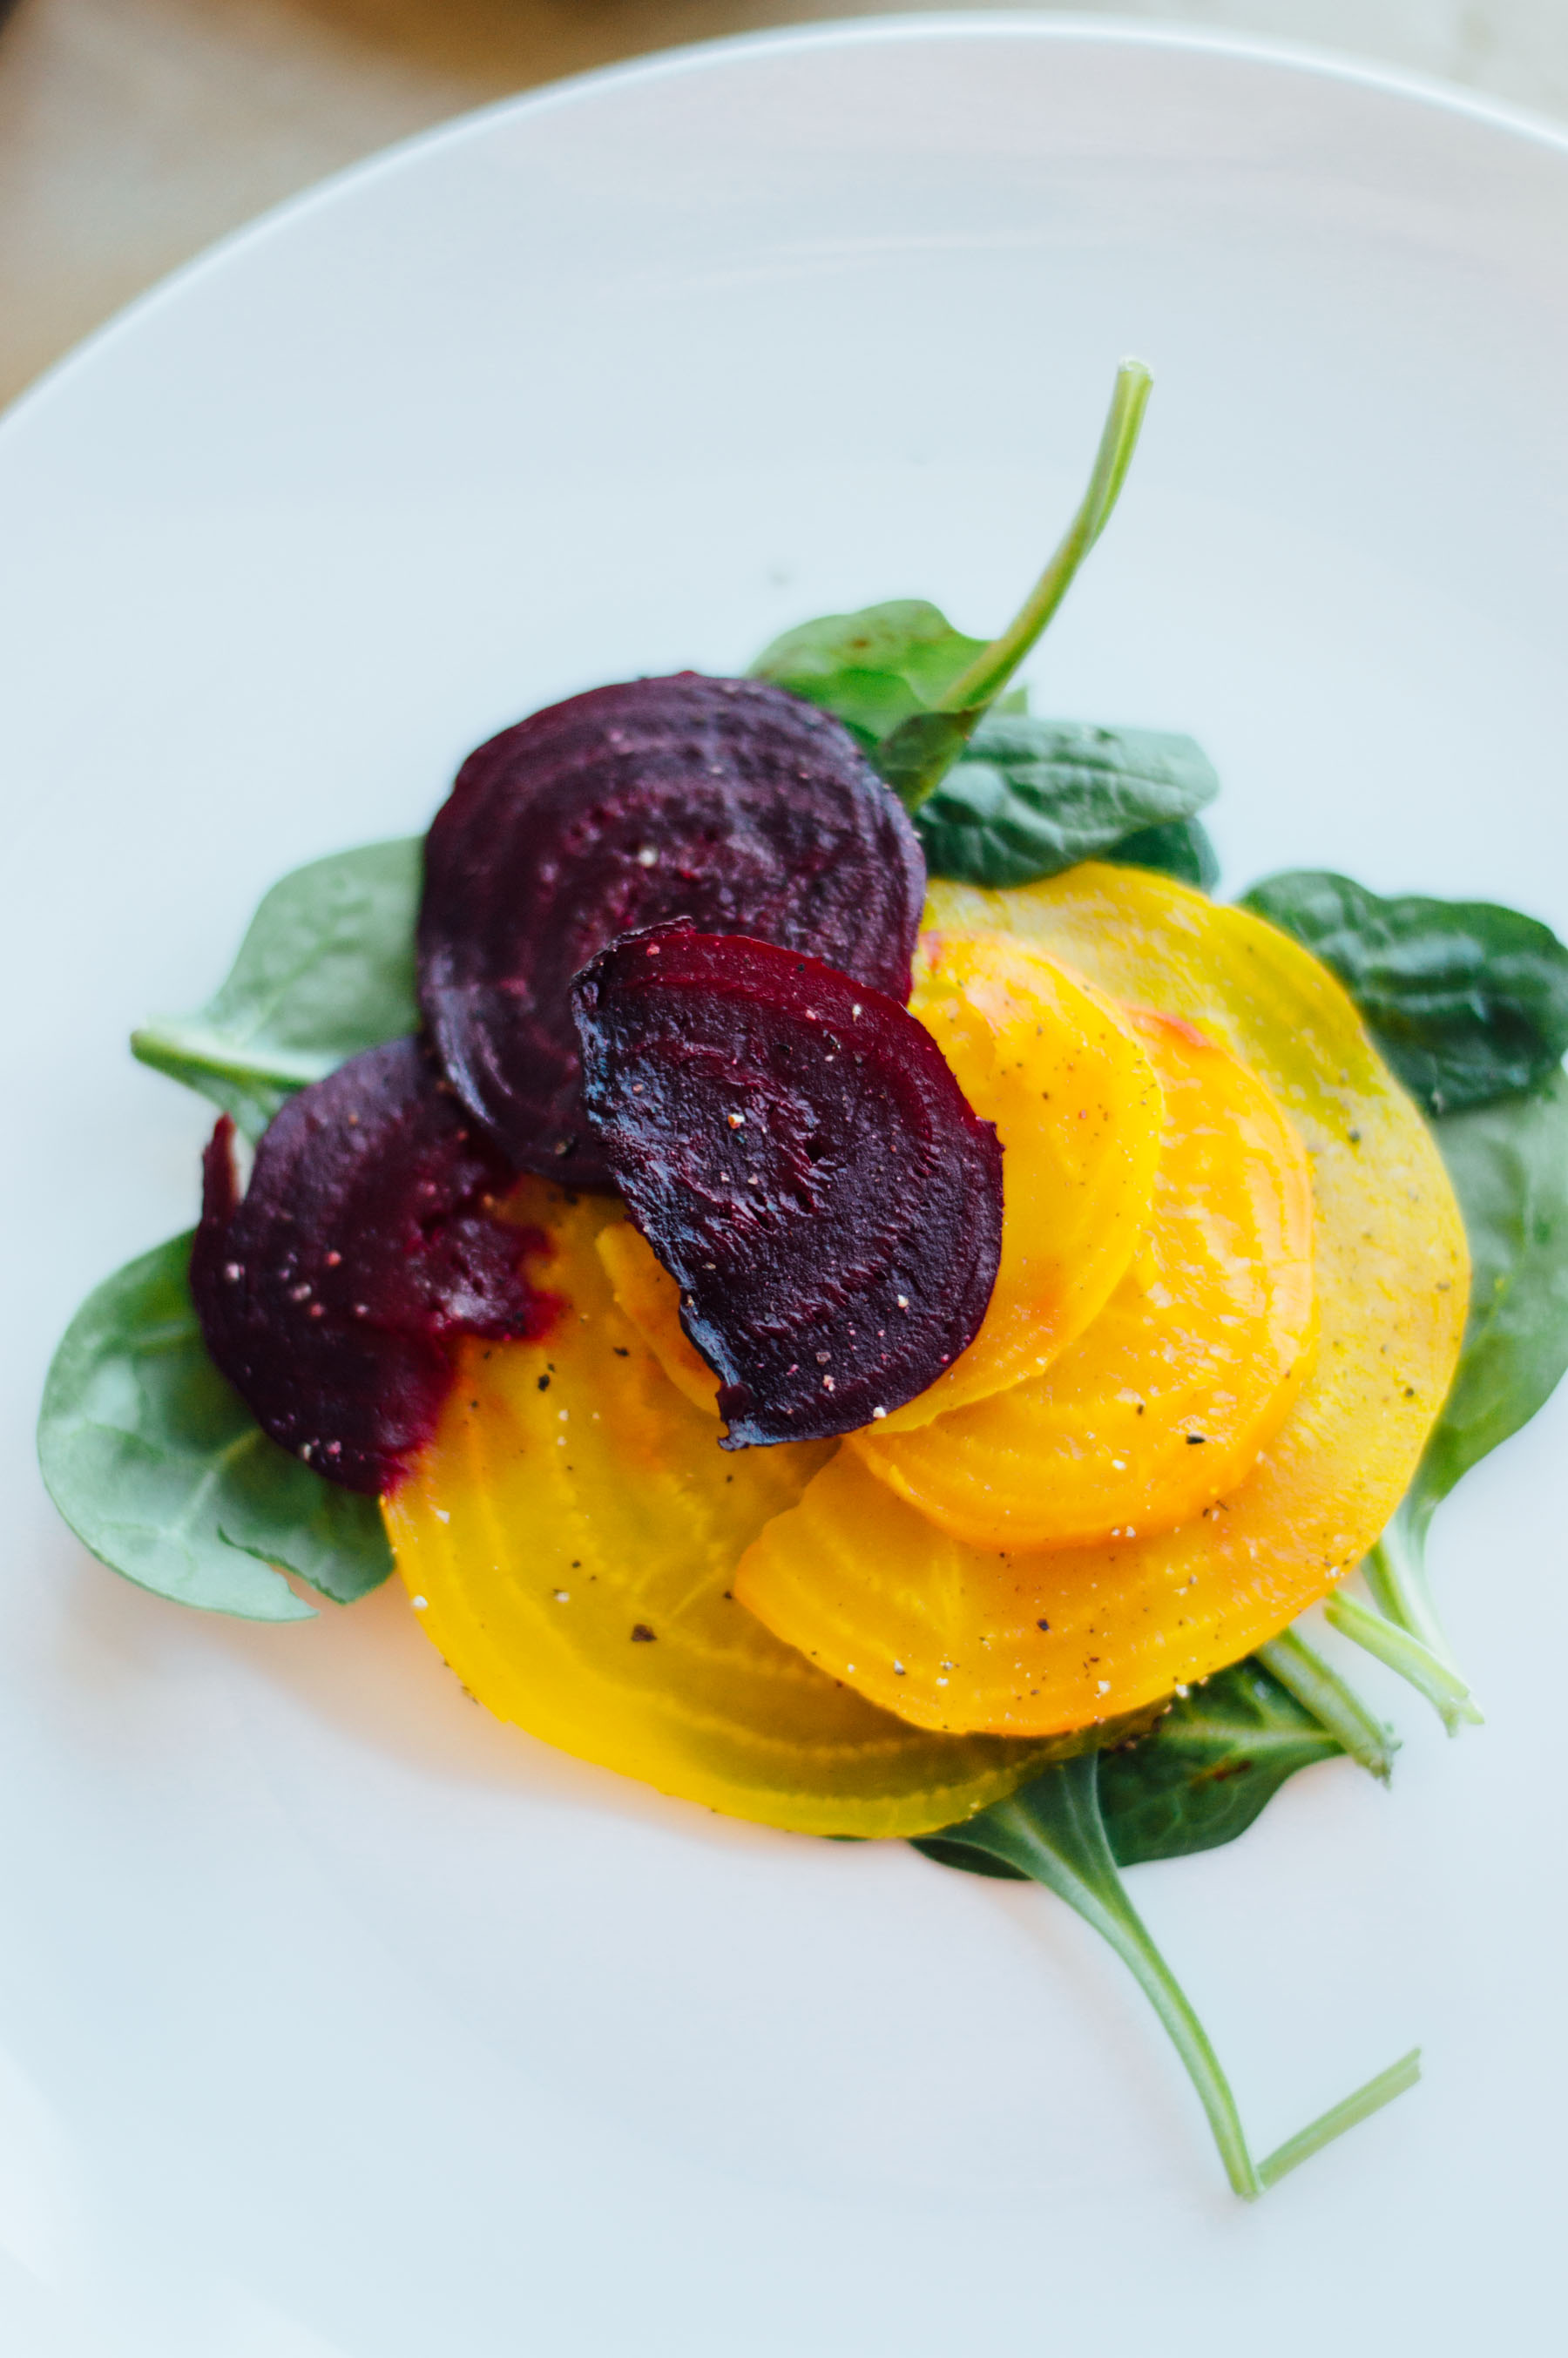 Roasted Golden Beets recipe in collaboration with the Boston Public Market | bygabriella.co